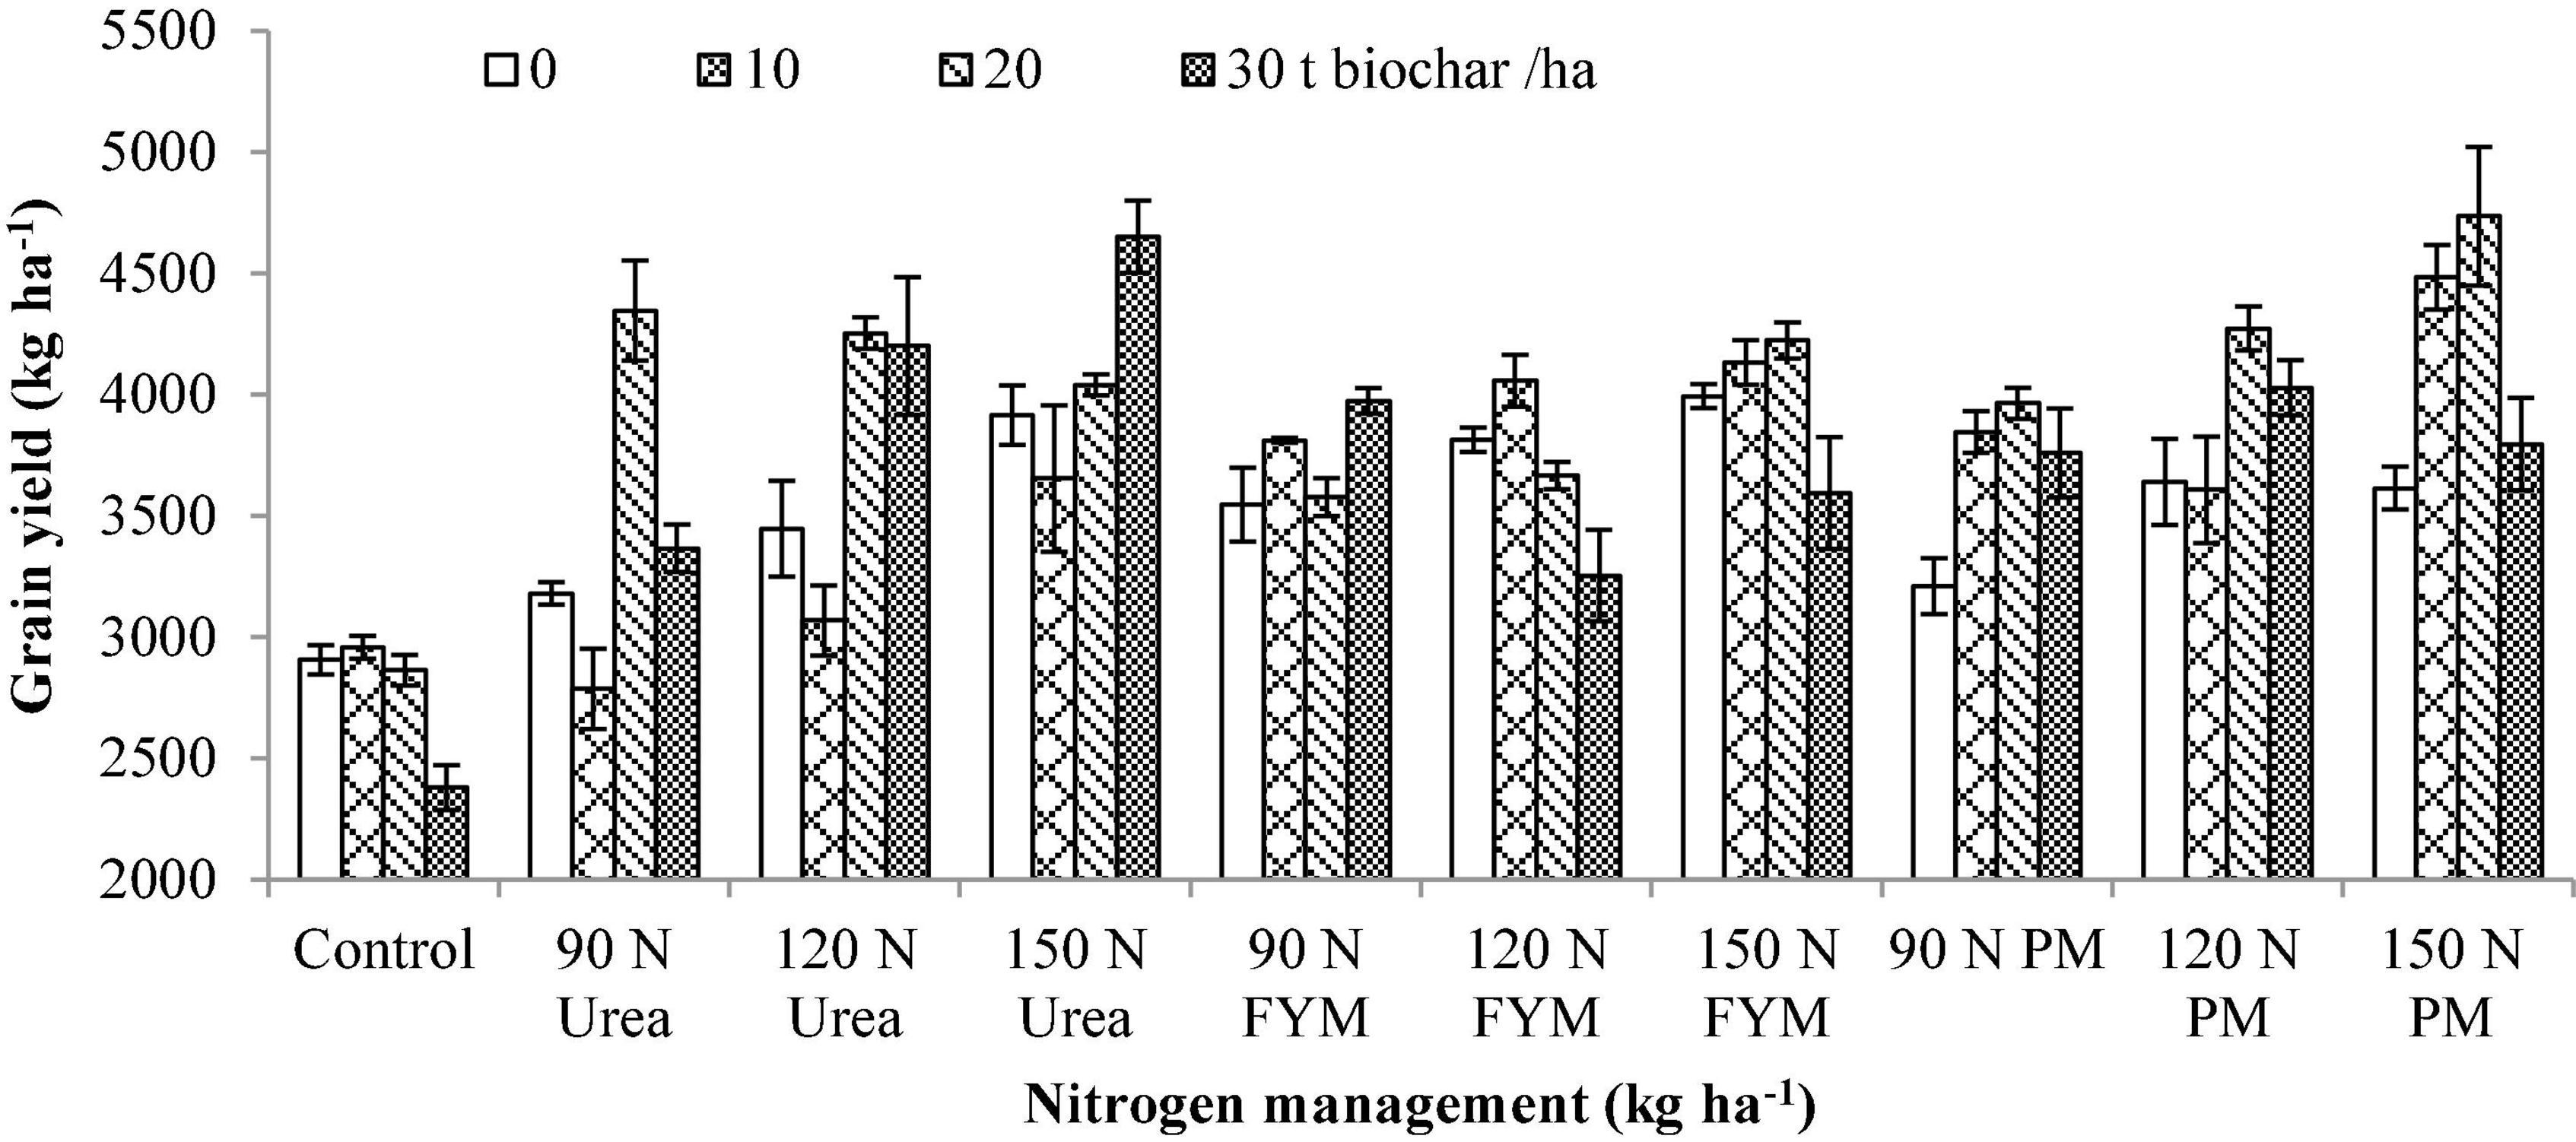 One-thousand grain weight and grain yield of 26 hybrids rice grown